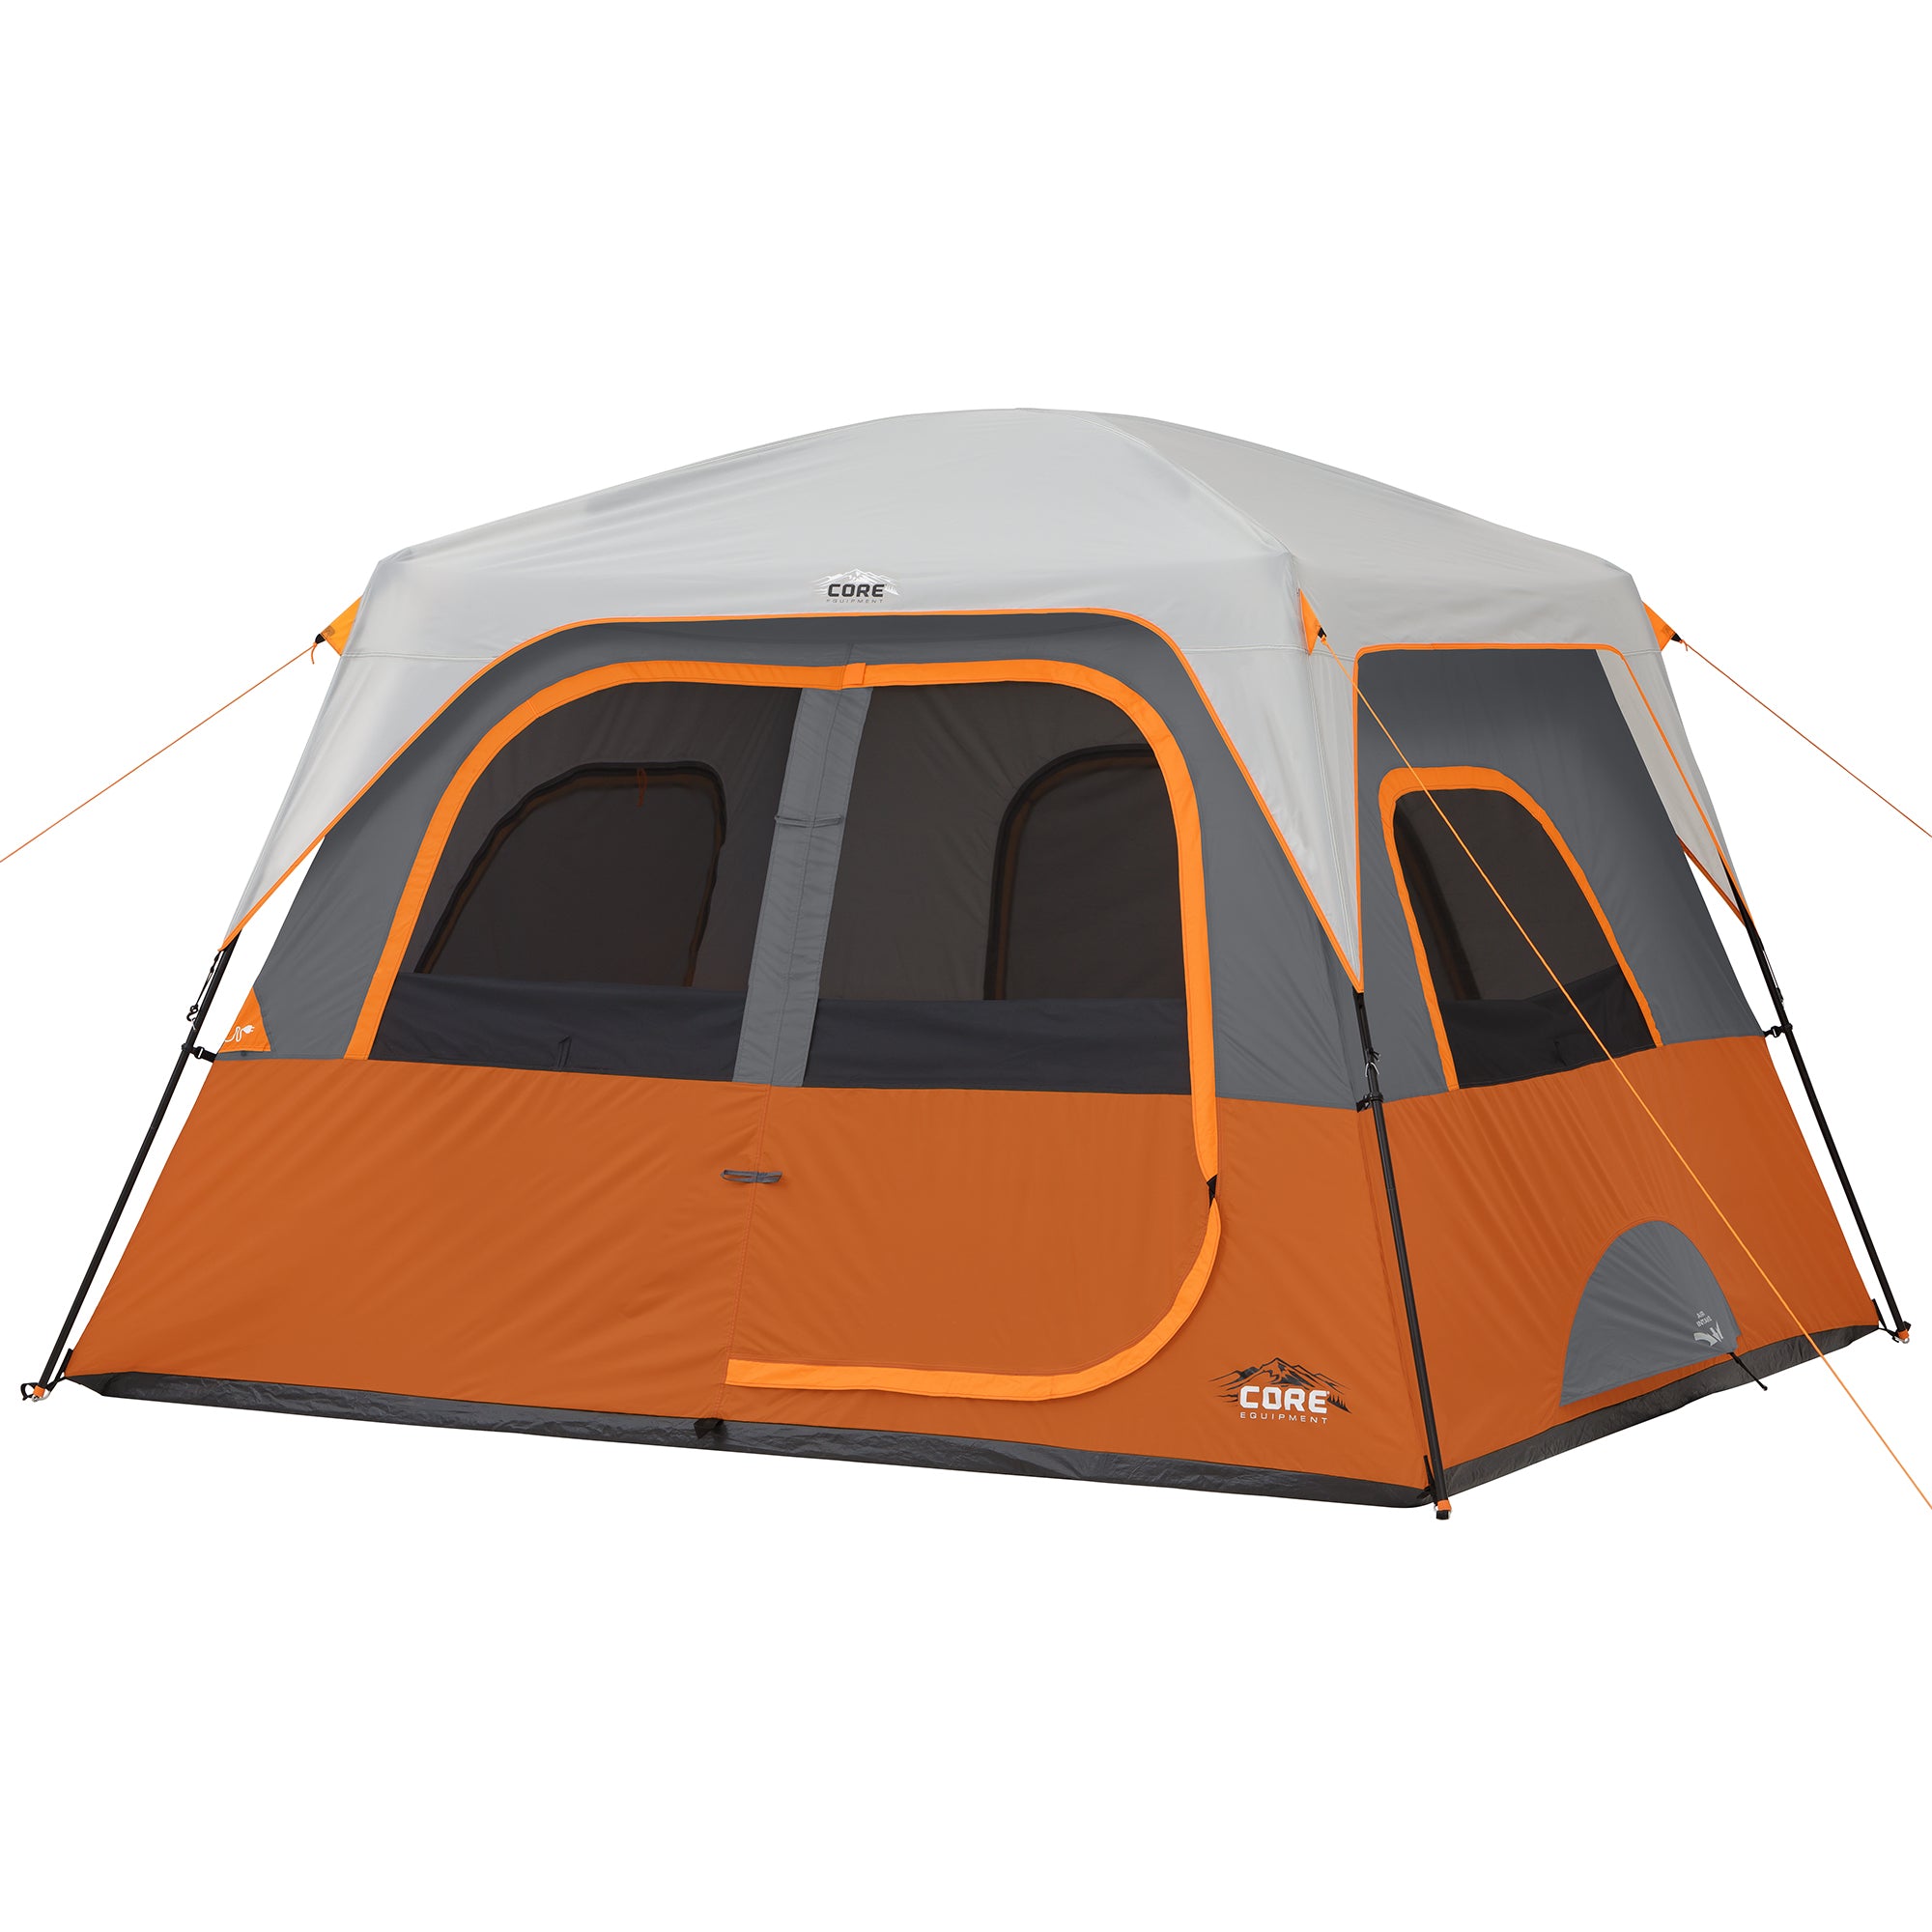 CORE 9 Person Tent, Large Multi Room Tent for Family with Full Rainfly for  Weather Protection and Storage for Camping Accessories